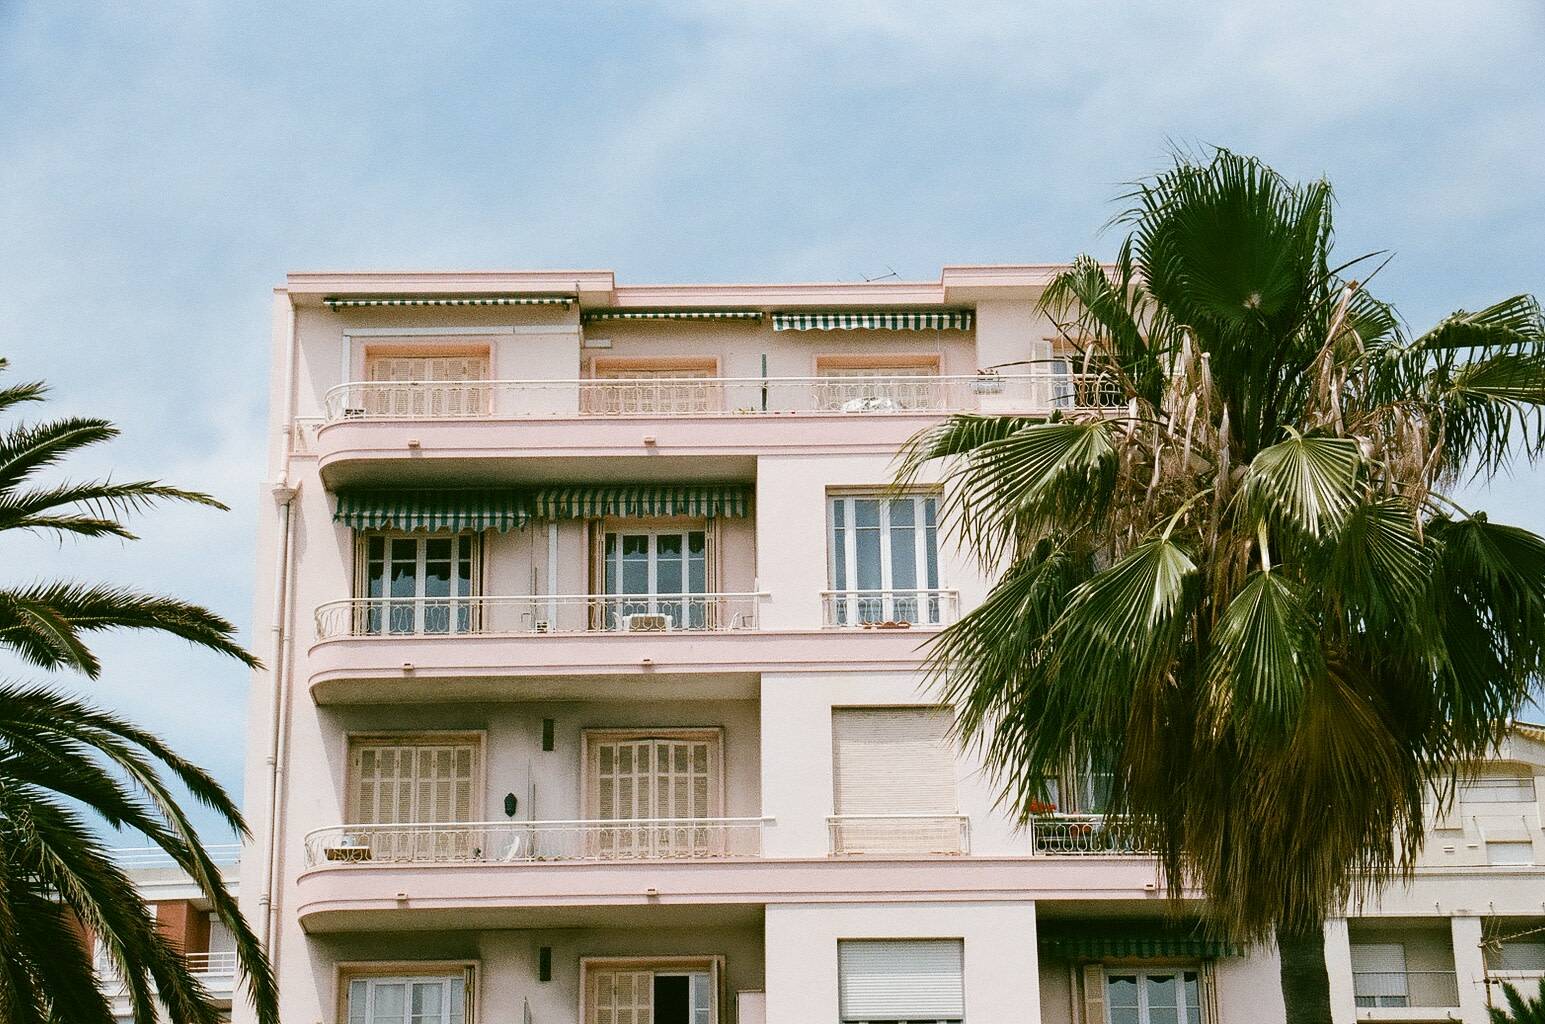 facade of a building with balconies behind a palm tree under the blue sky